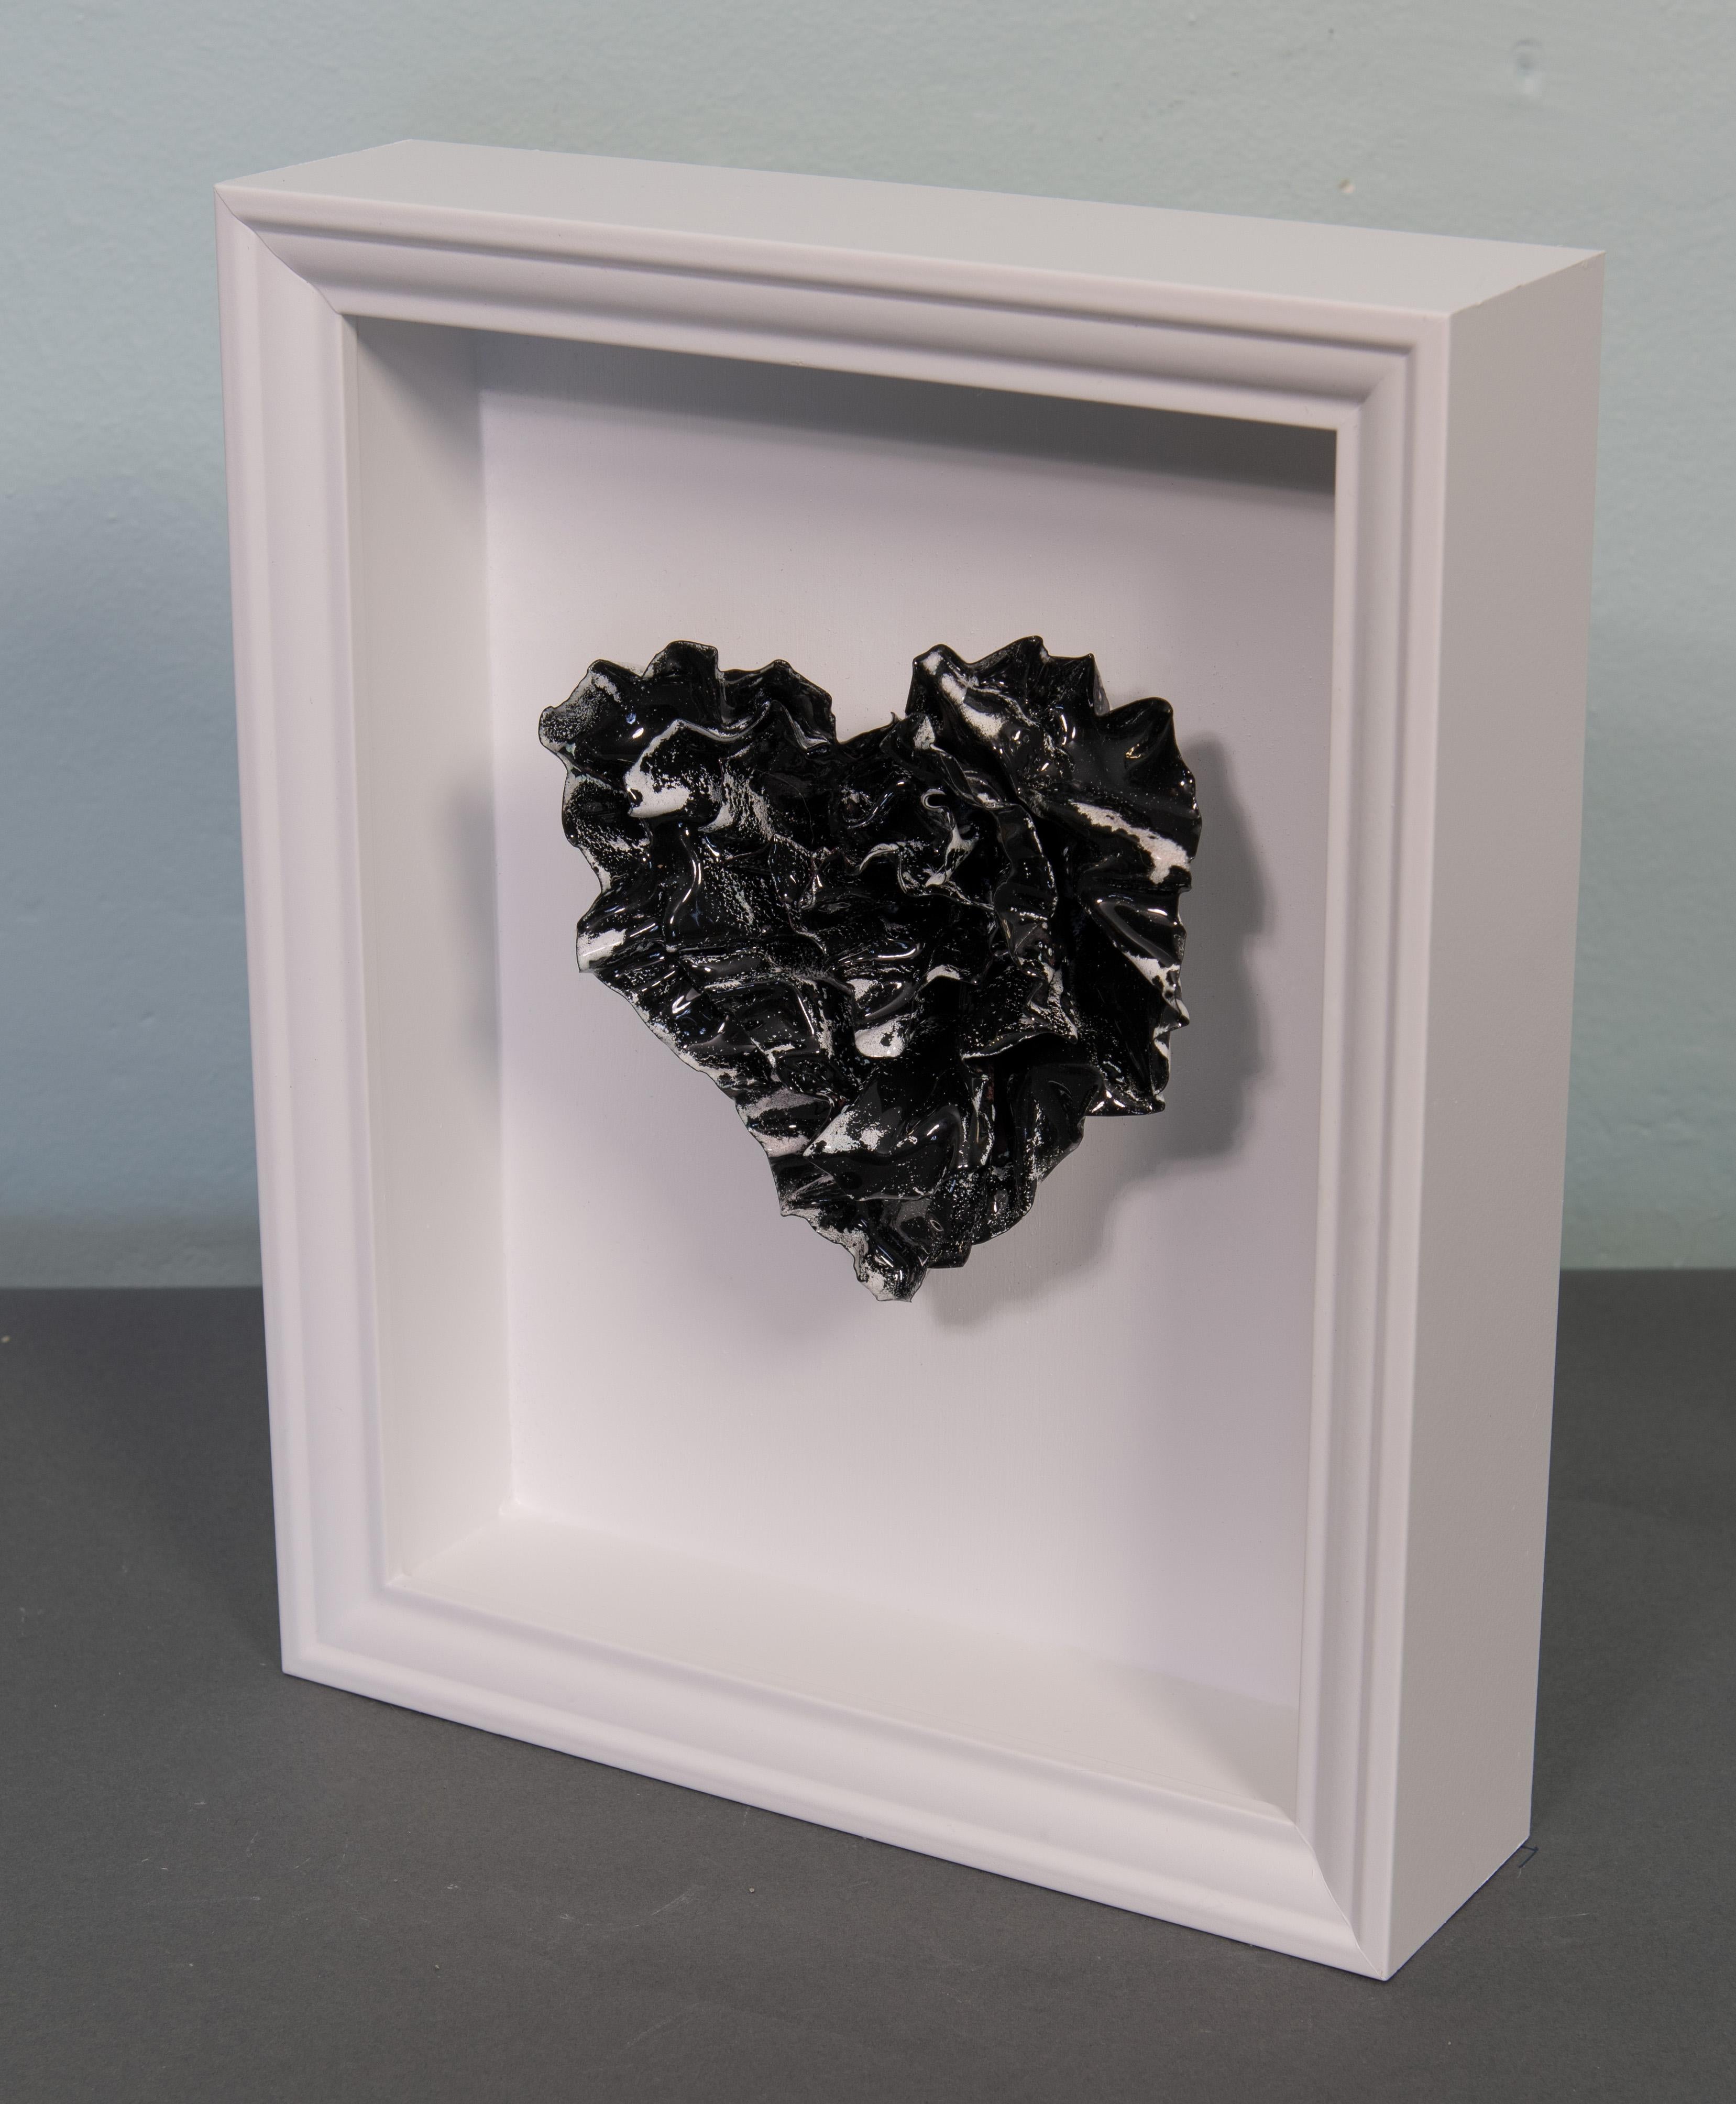 Unforgotten Heart is a stunning abstract heart sculpture by artist Sherry Been.
This metal sculpture features a striking contrast of black and white enamel, symbolizing the struggle between visibility and invisibility. Each stroke of color tells a